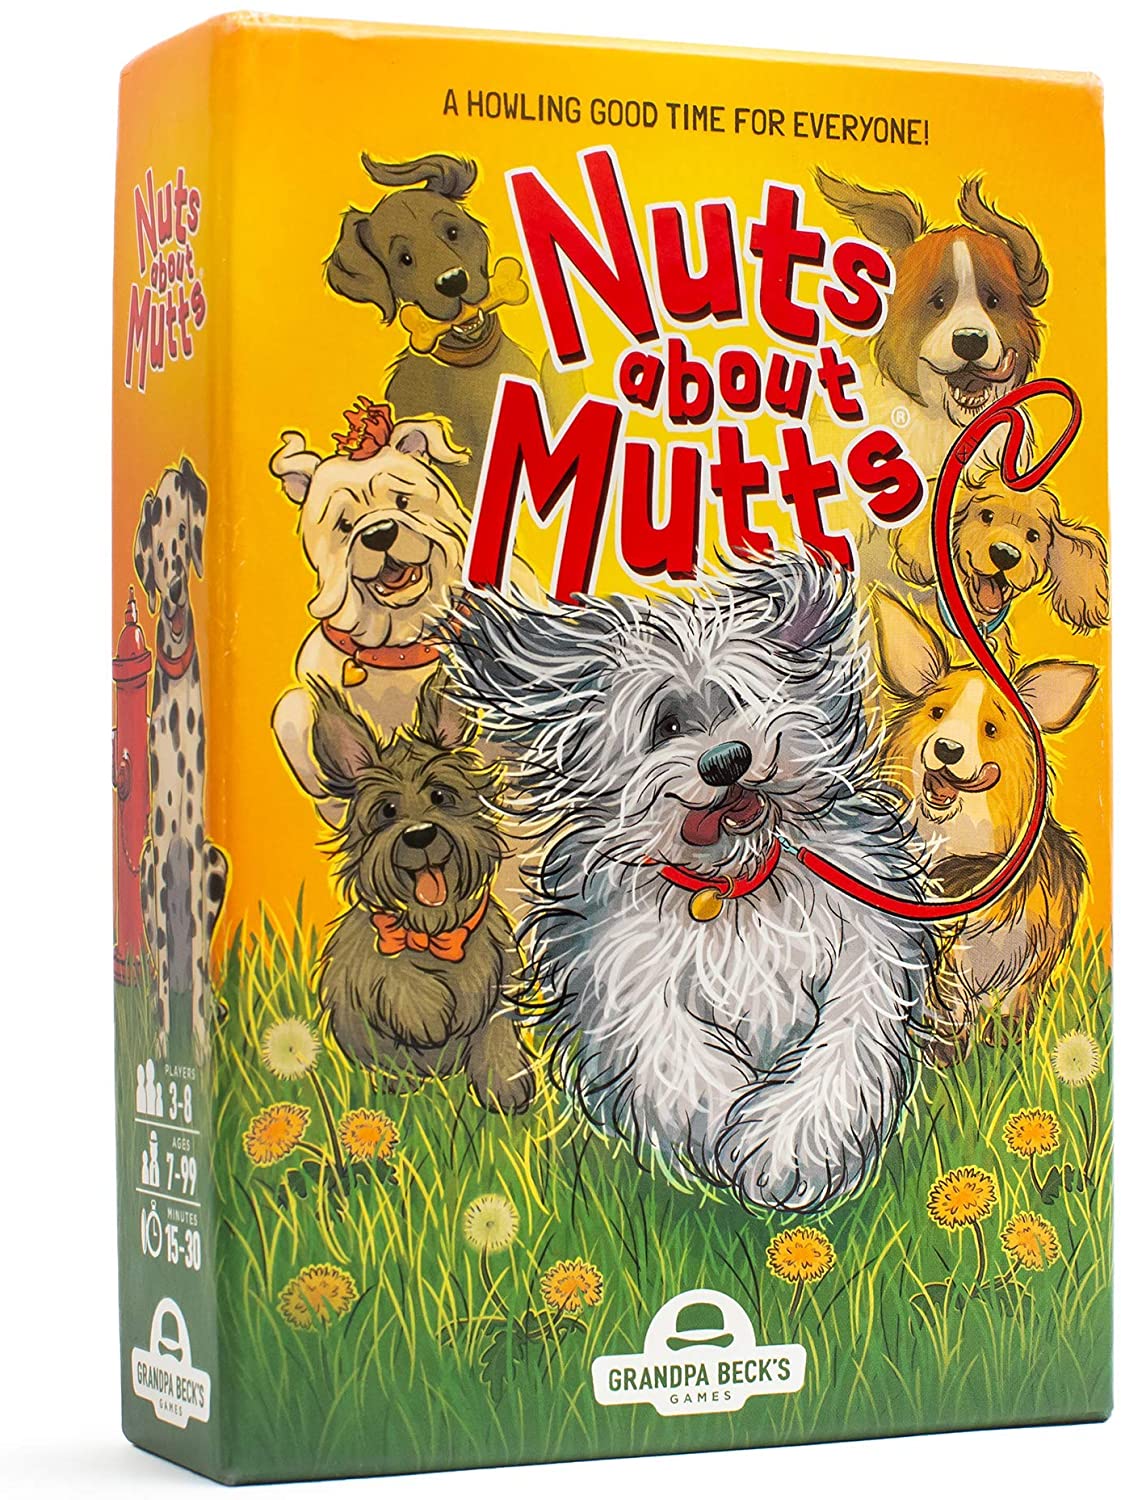 Grandpa Beck's - Nuts about Mutts